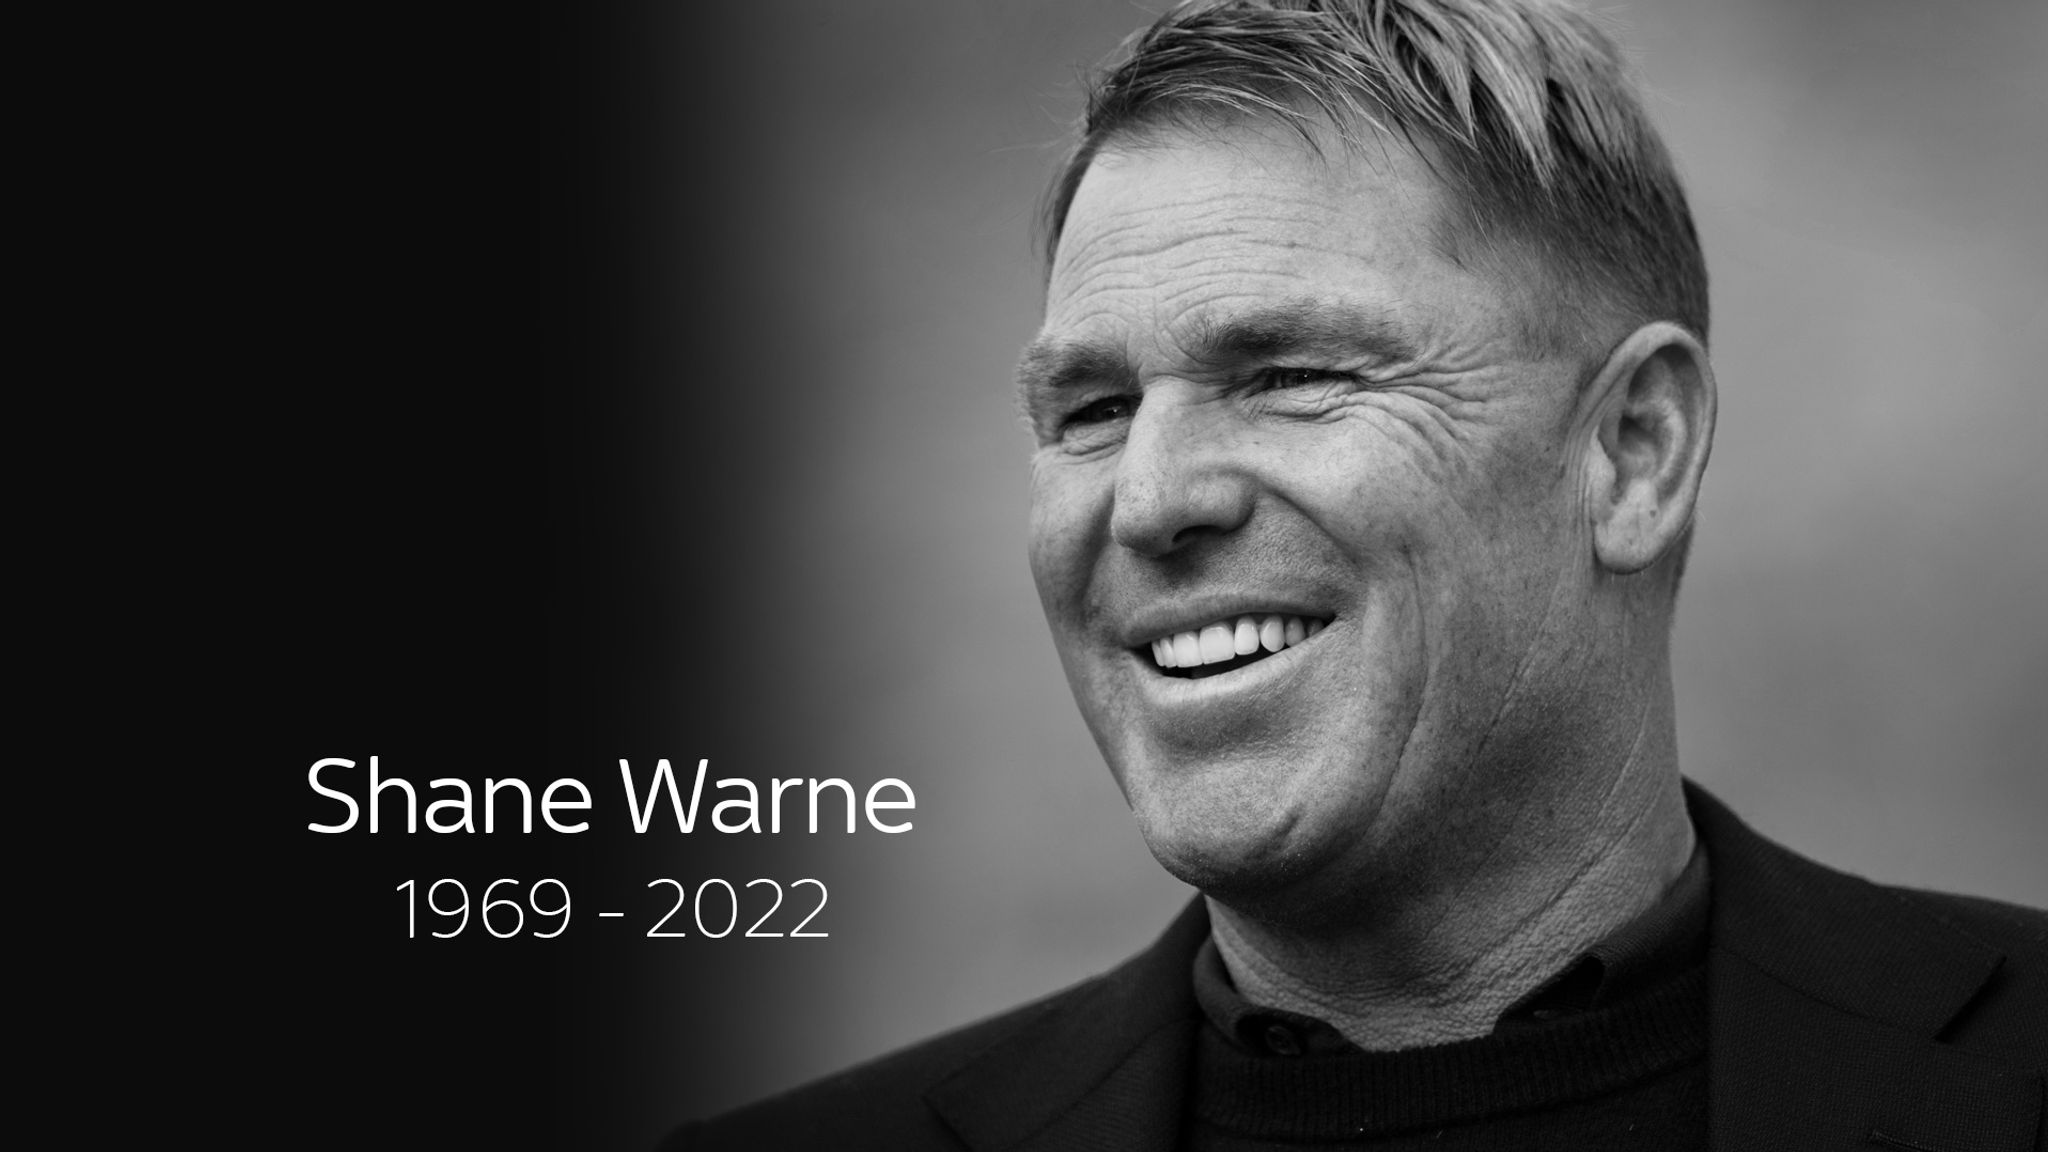 Shane Warne was 52 years old when he passed away in March this year | Twitter